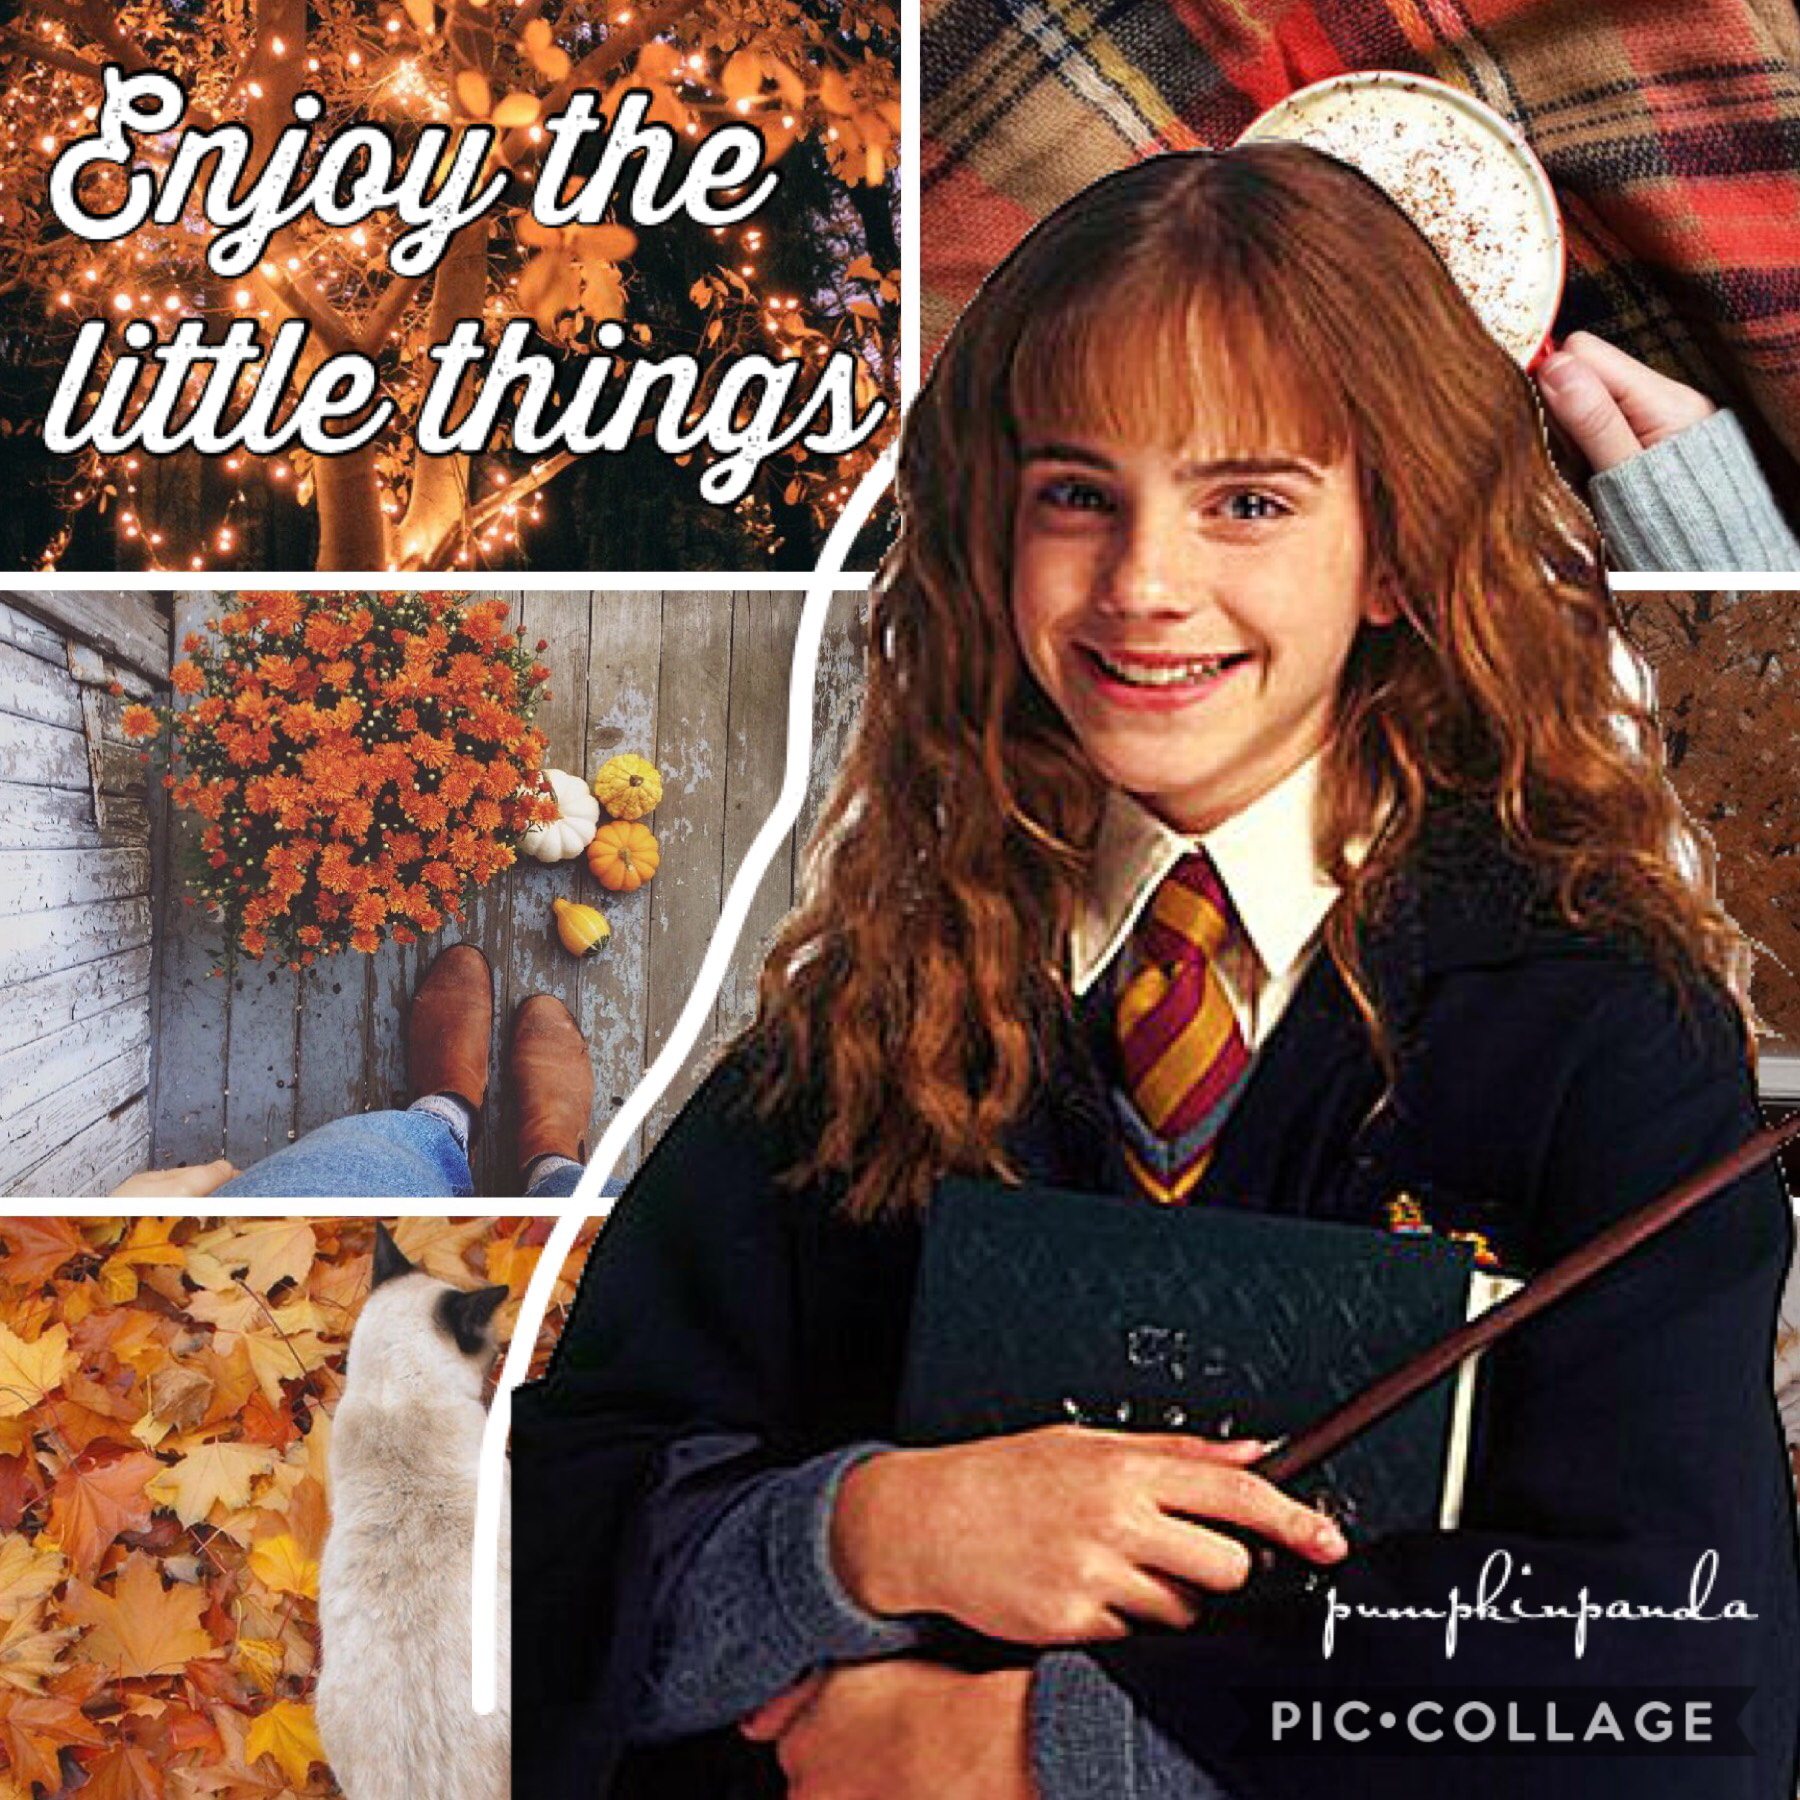 Enjoy the little things 🧡💜 Who’s your favourite character from Harry Potter? Mines Hermione, and her ginger cat Crookshanks.